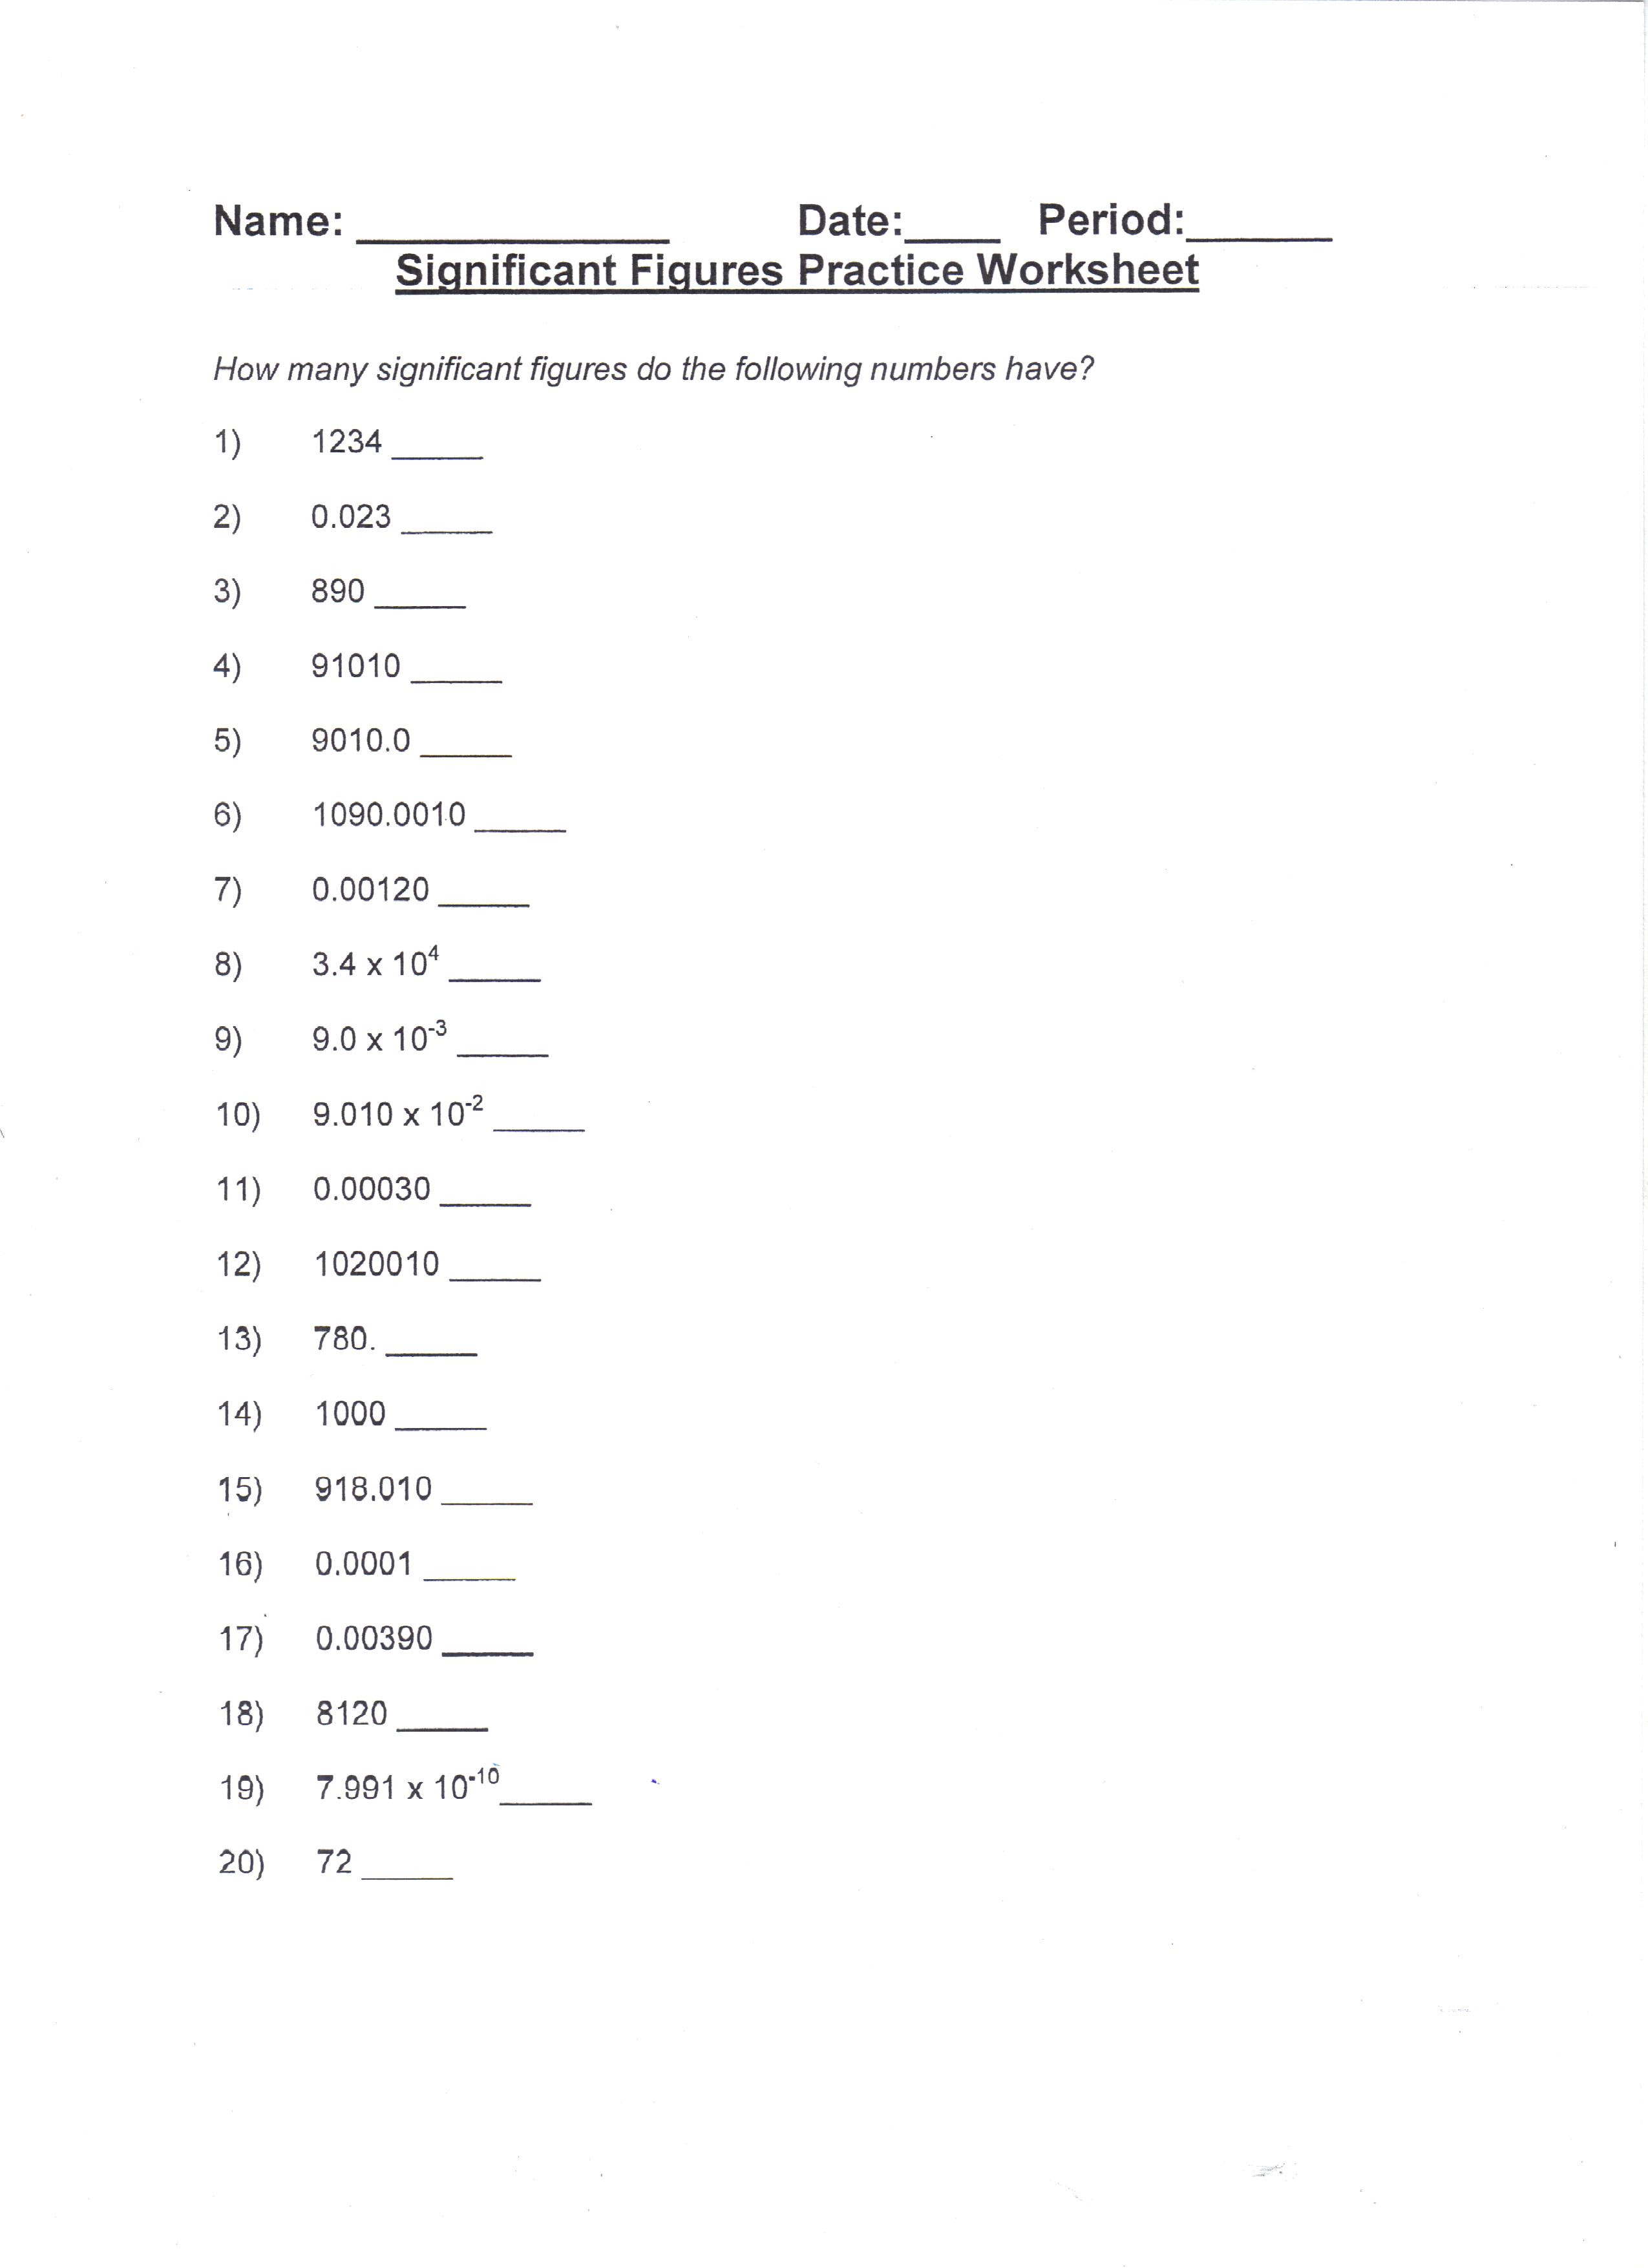 chemistry-1-significant-figures-worksheet-answers-ecopher